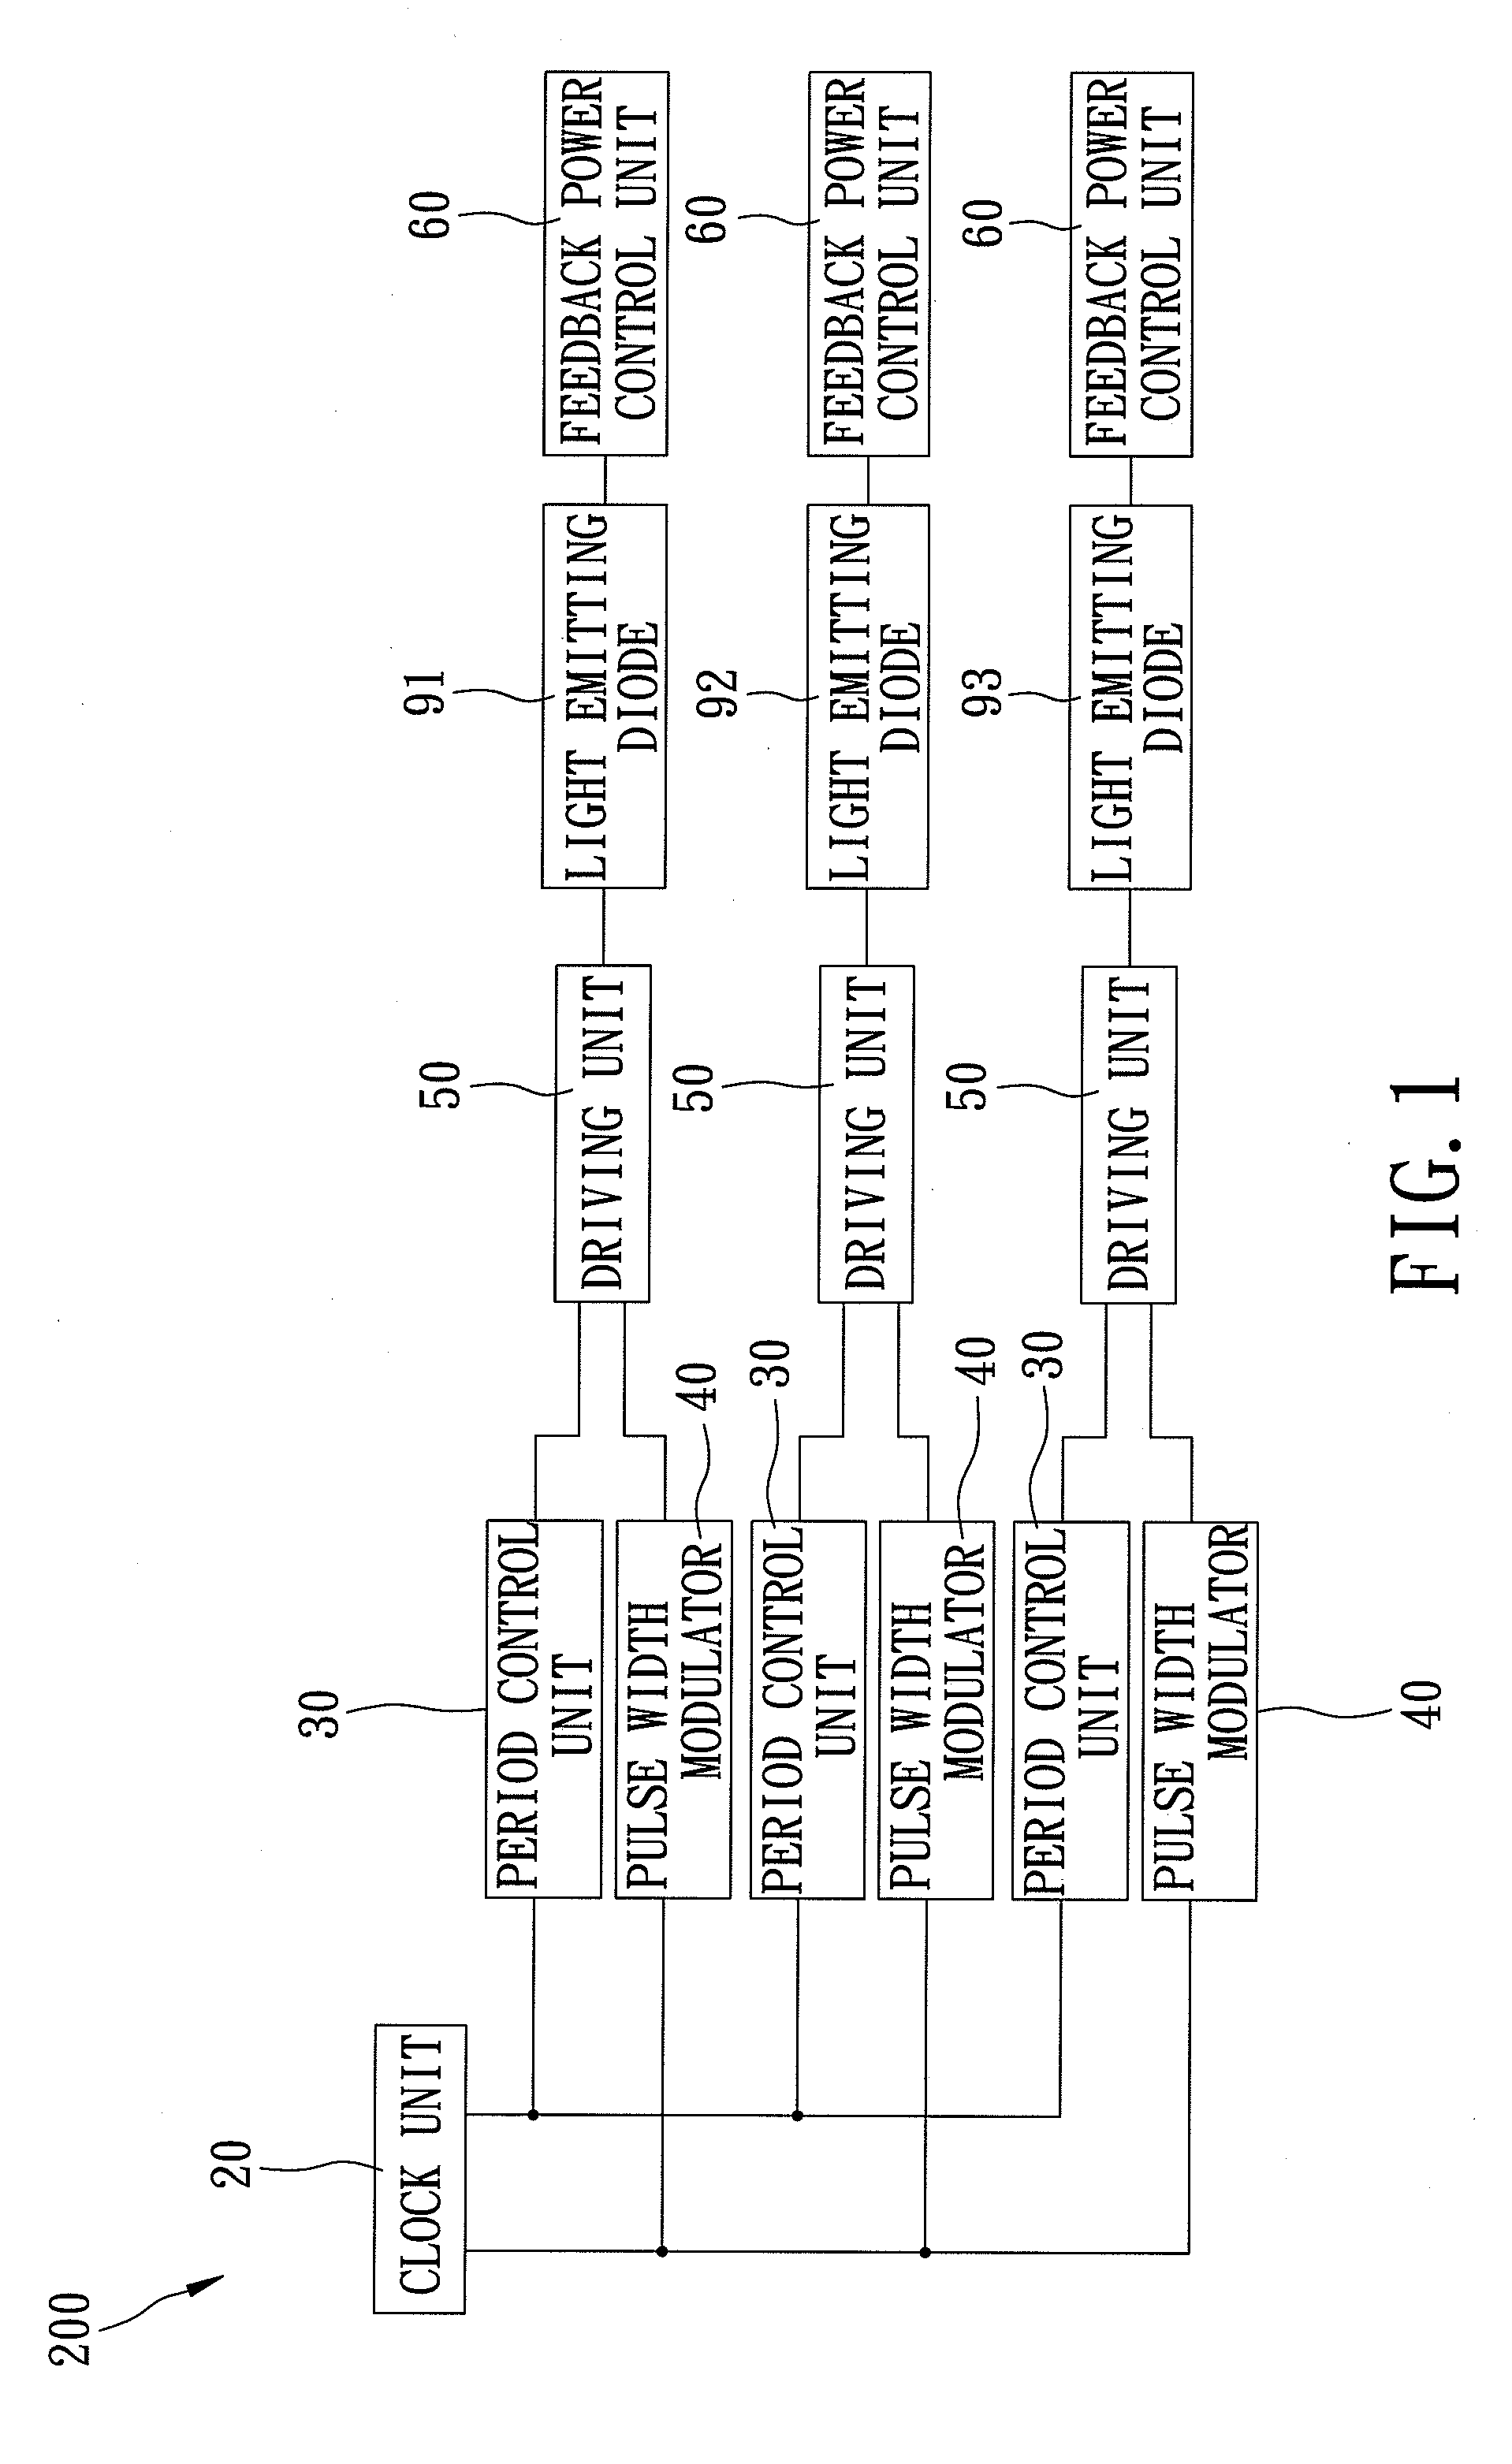 Control system for different colors of light emitting diodes